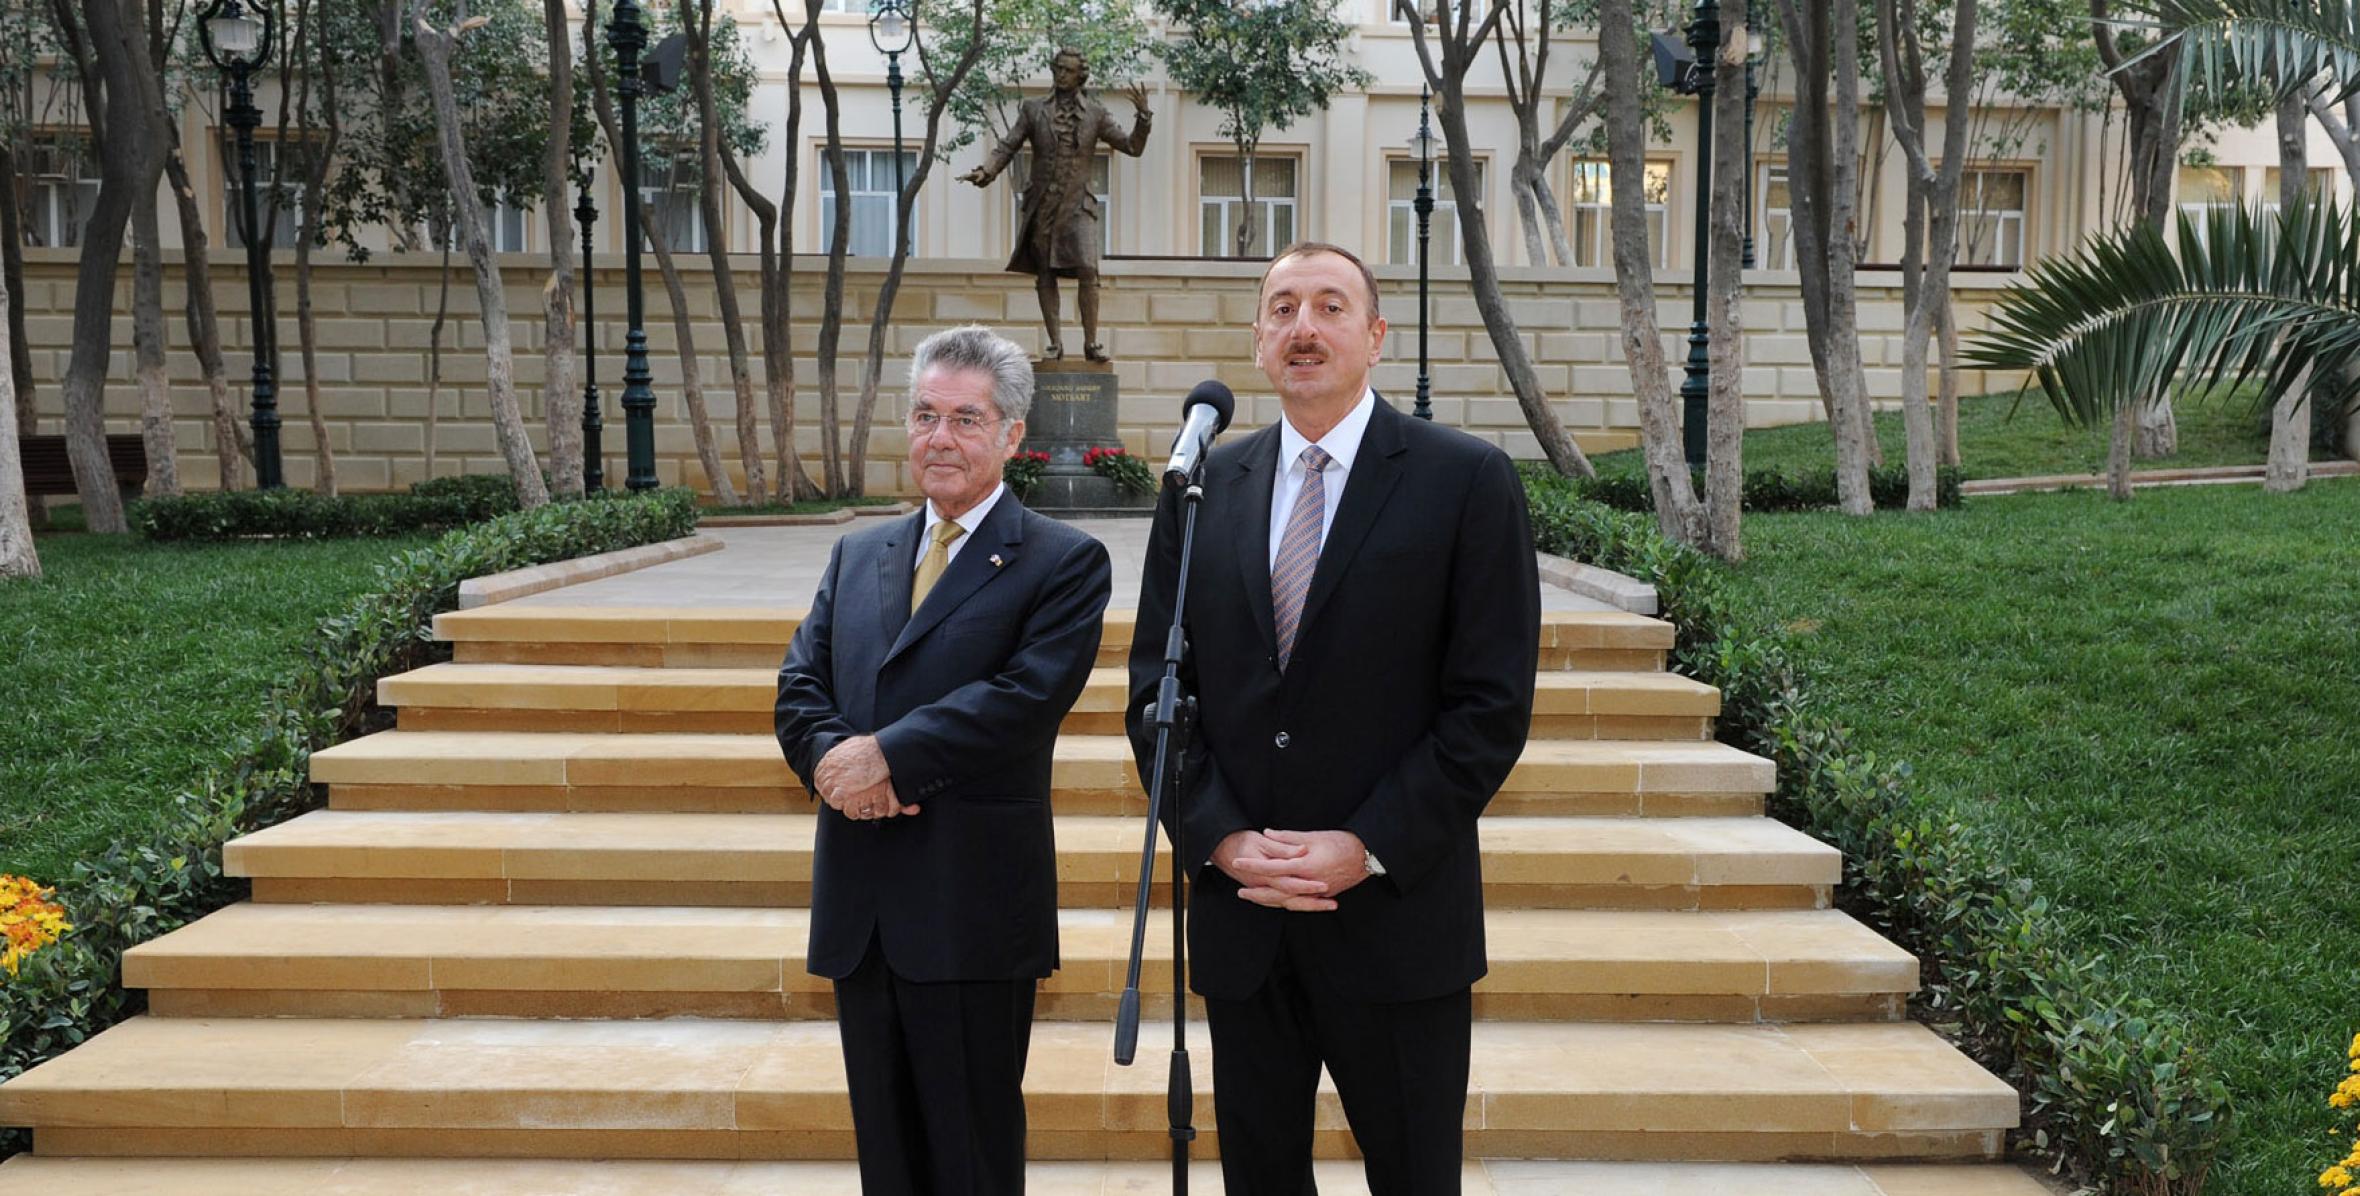 Ilham Aliyev and Federal President of the Republic of Austria Heinz Fischer attended a ceremony to unveil a statue of brilliant composer Wolfgang Mozart